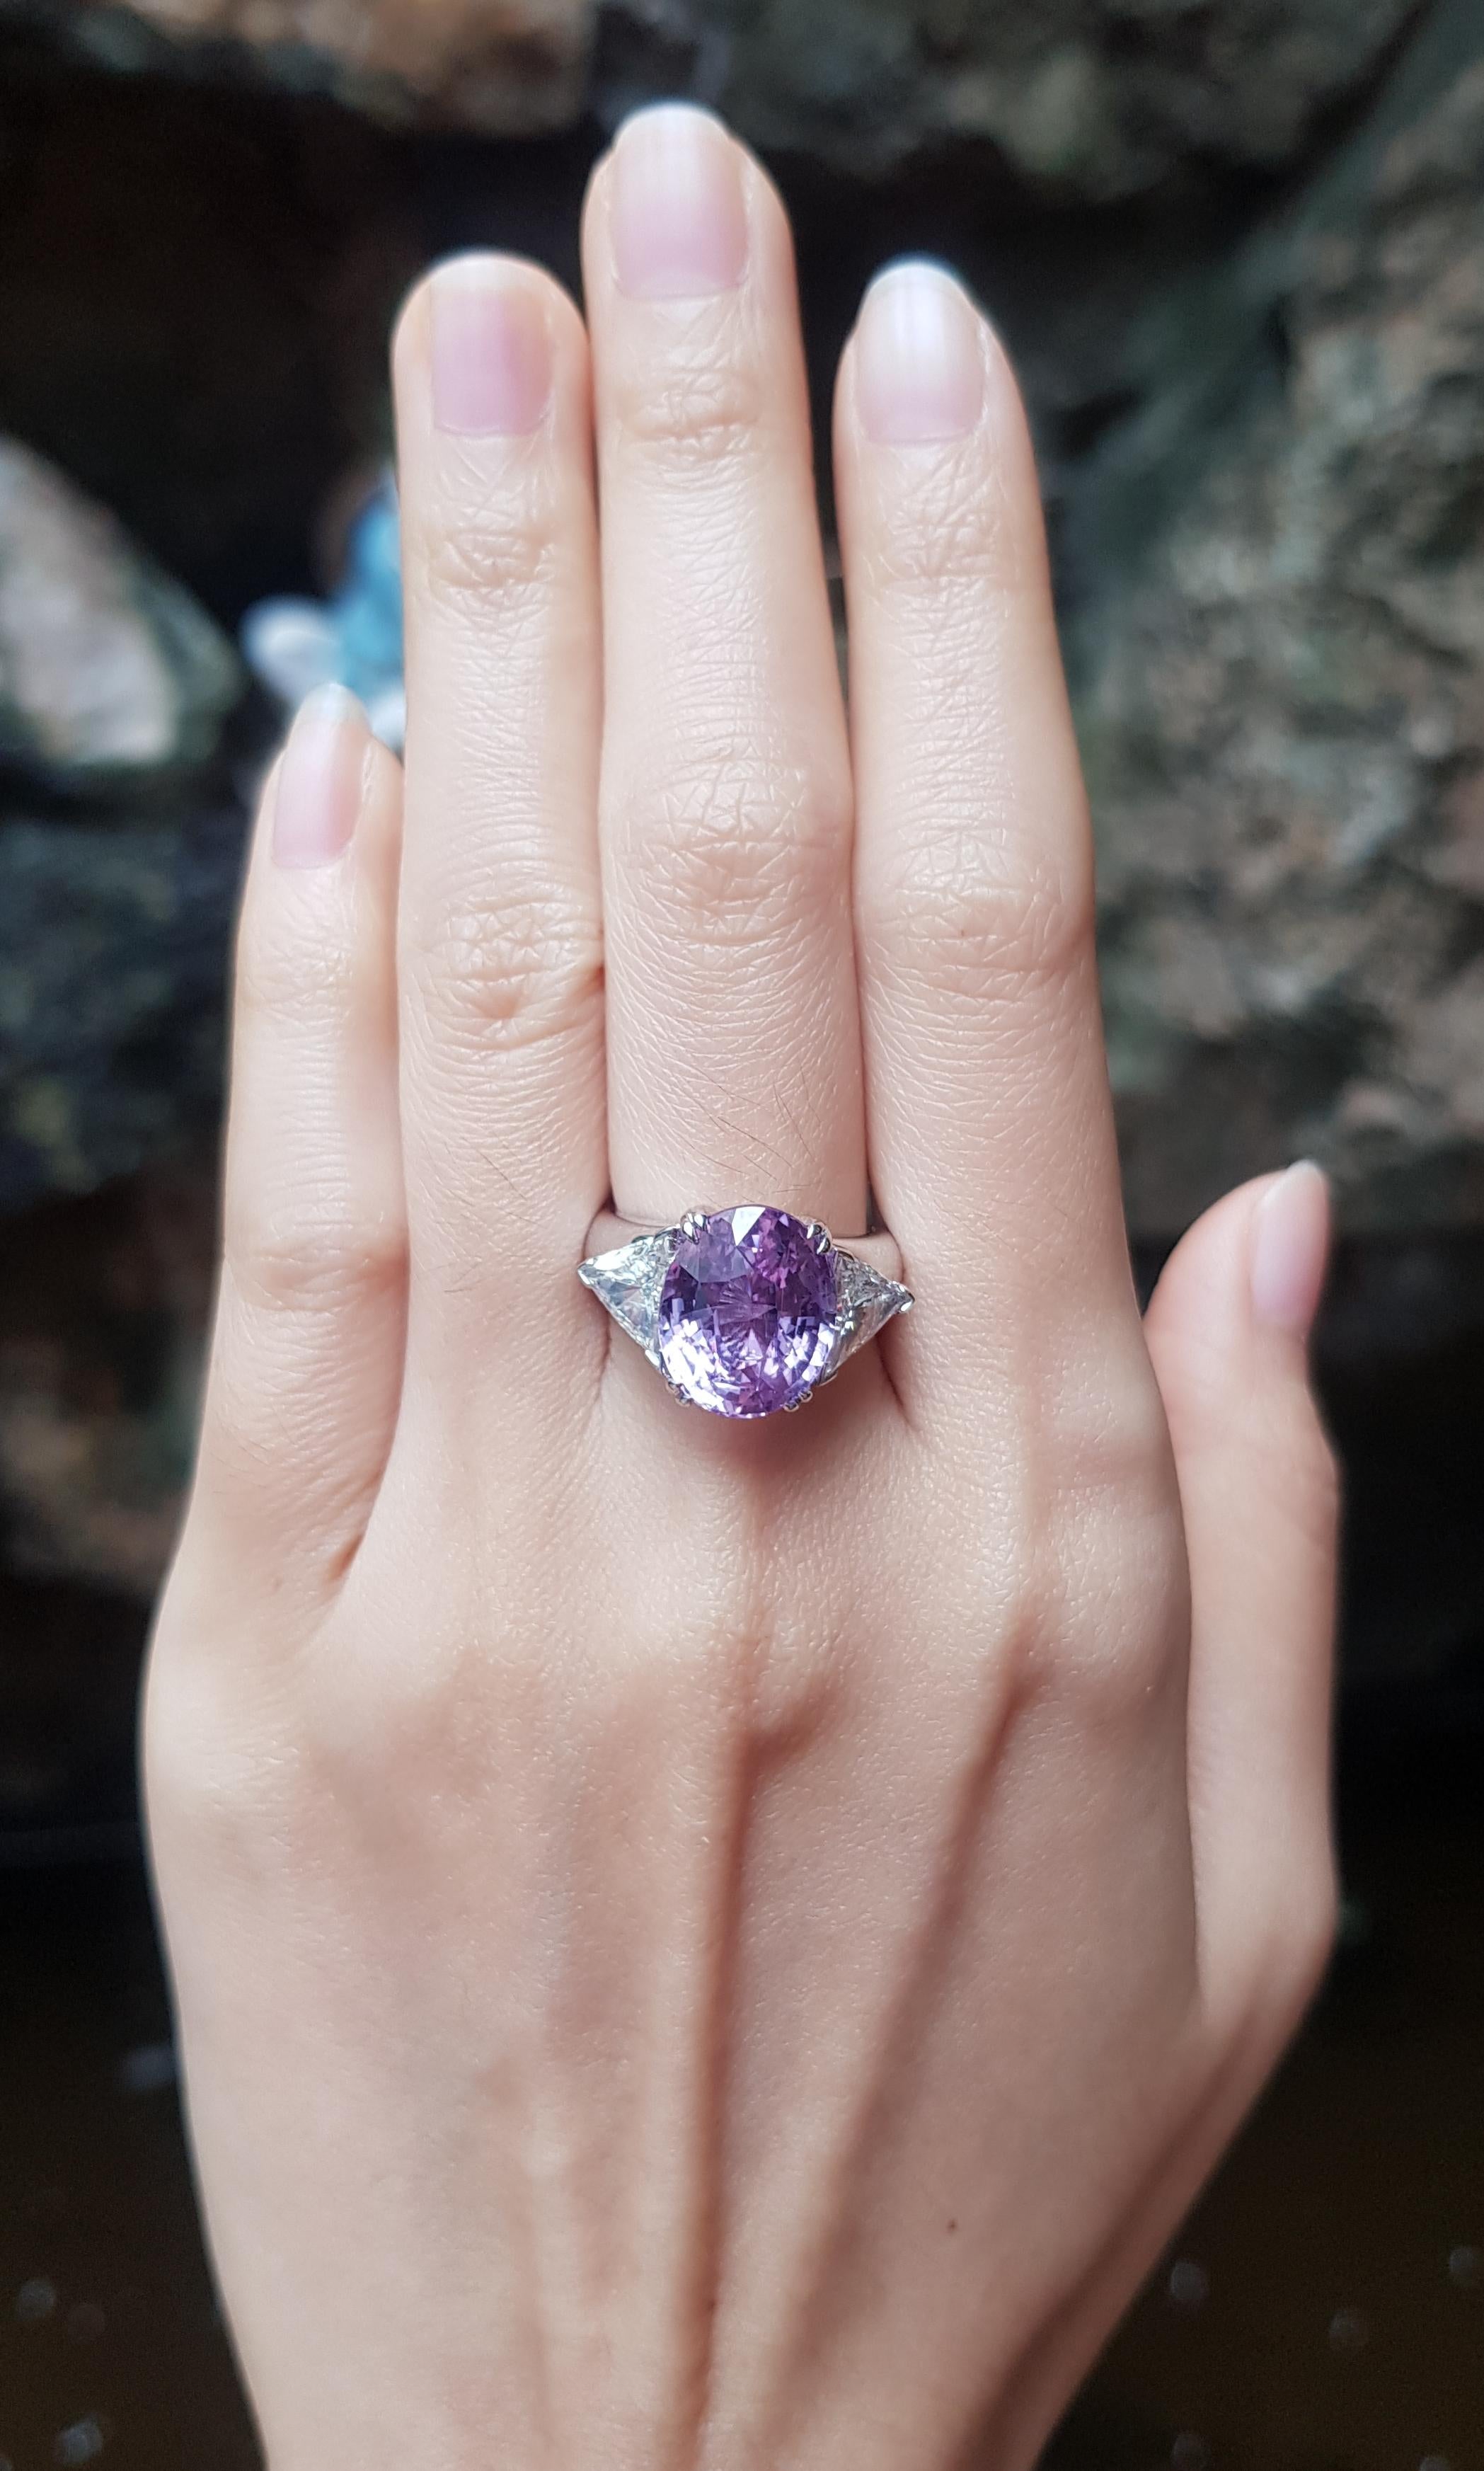 Unheated Purple Sapphire 8.66 carats with Diamond 1.87 carats Ring set in Platinum 950 Settings
(GIA & GIT Certified)

Width:  2.0 cm 
Length: 1.3 cm
Ring Size: 51
Total Weight: 13.5 grams

Purple Sapphire 
Width:  0.8 cm 
Length: 1.3 cm

